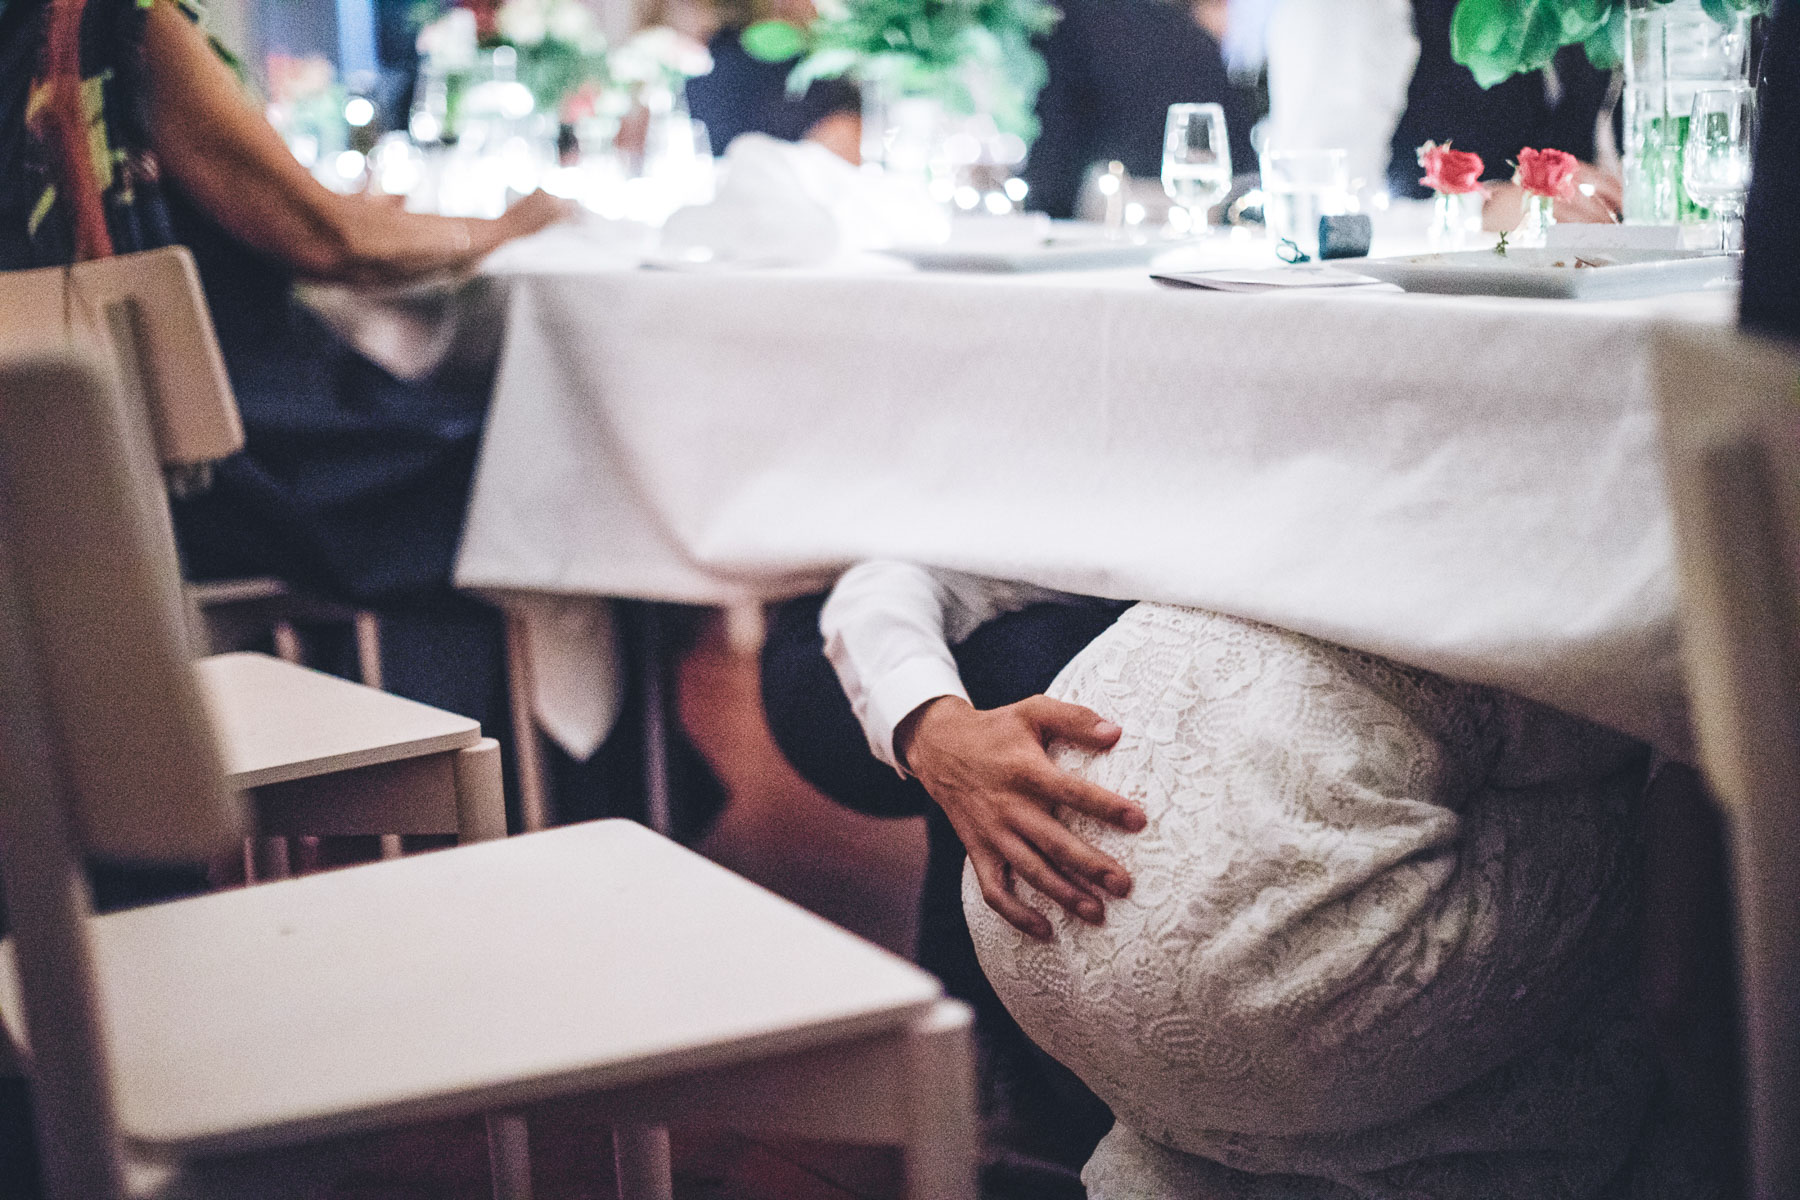 another swedish wedding tradition of being under the table